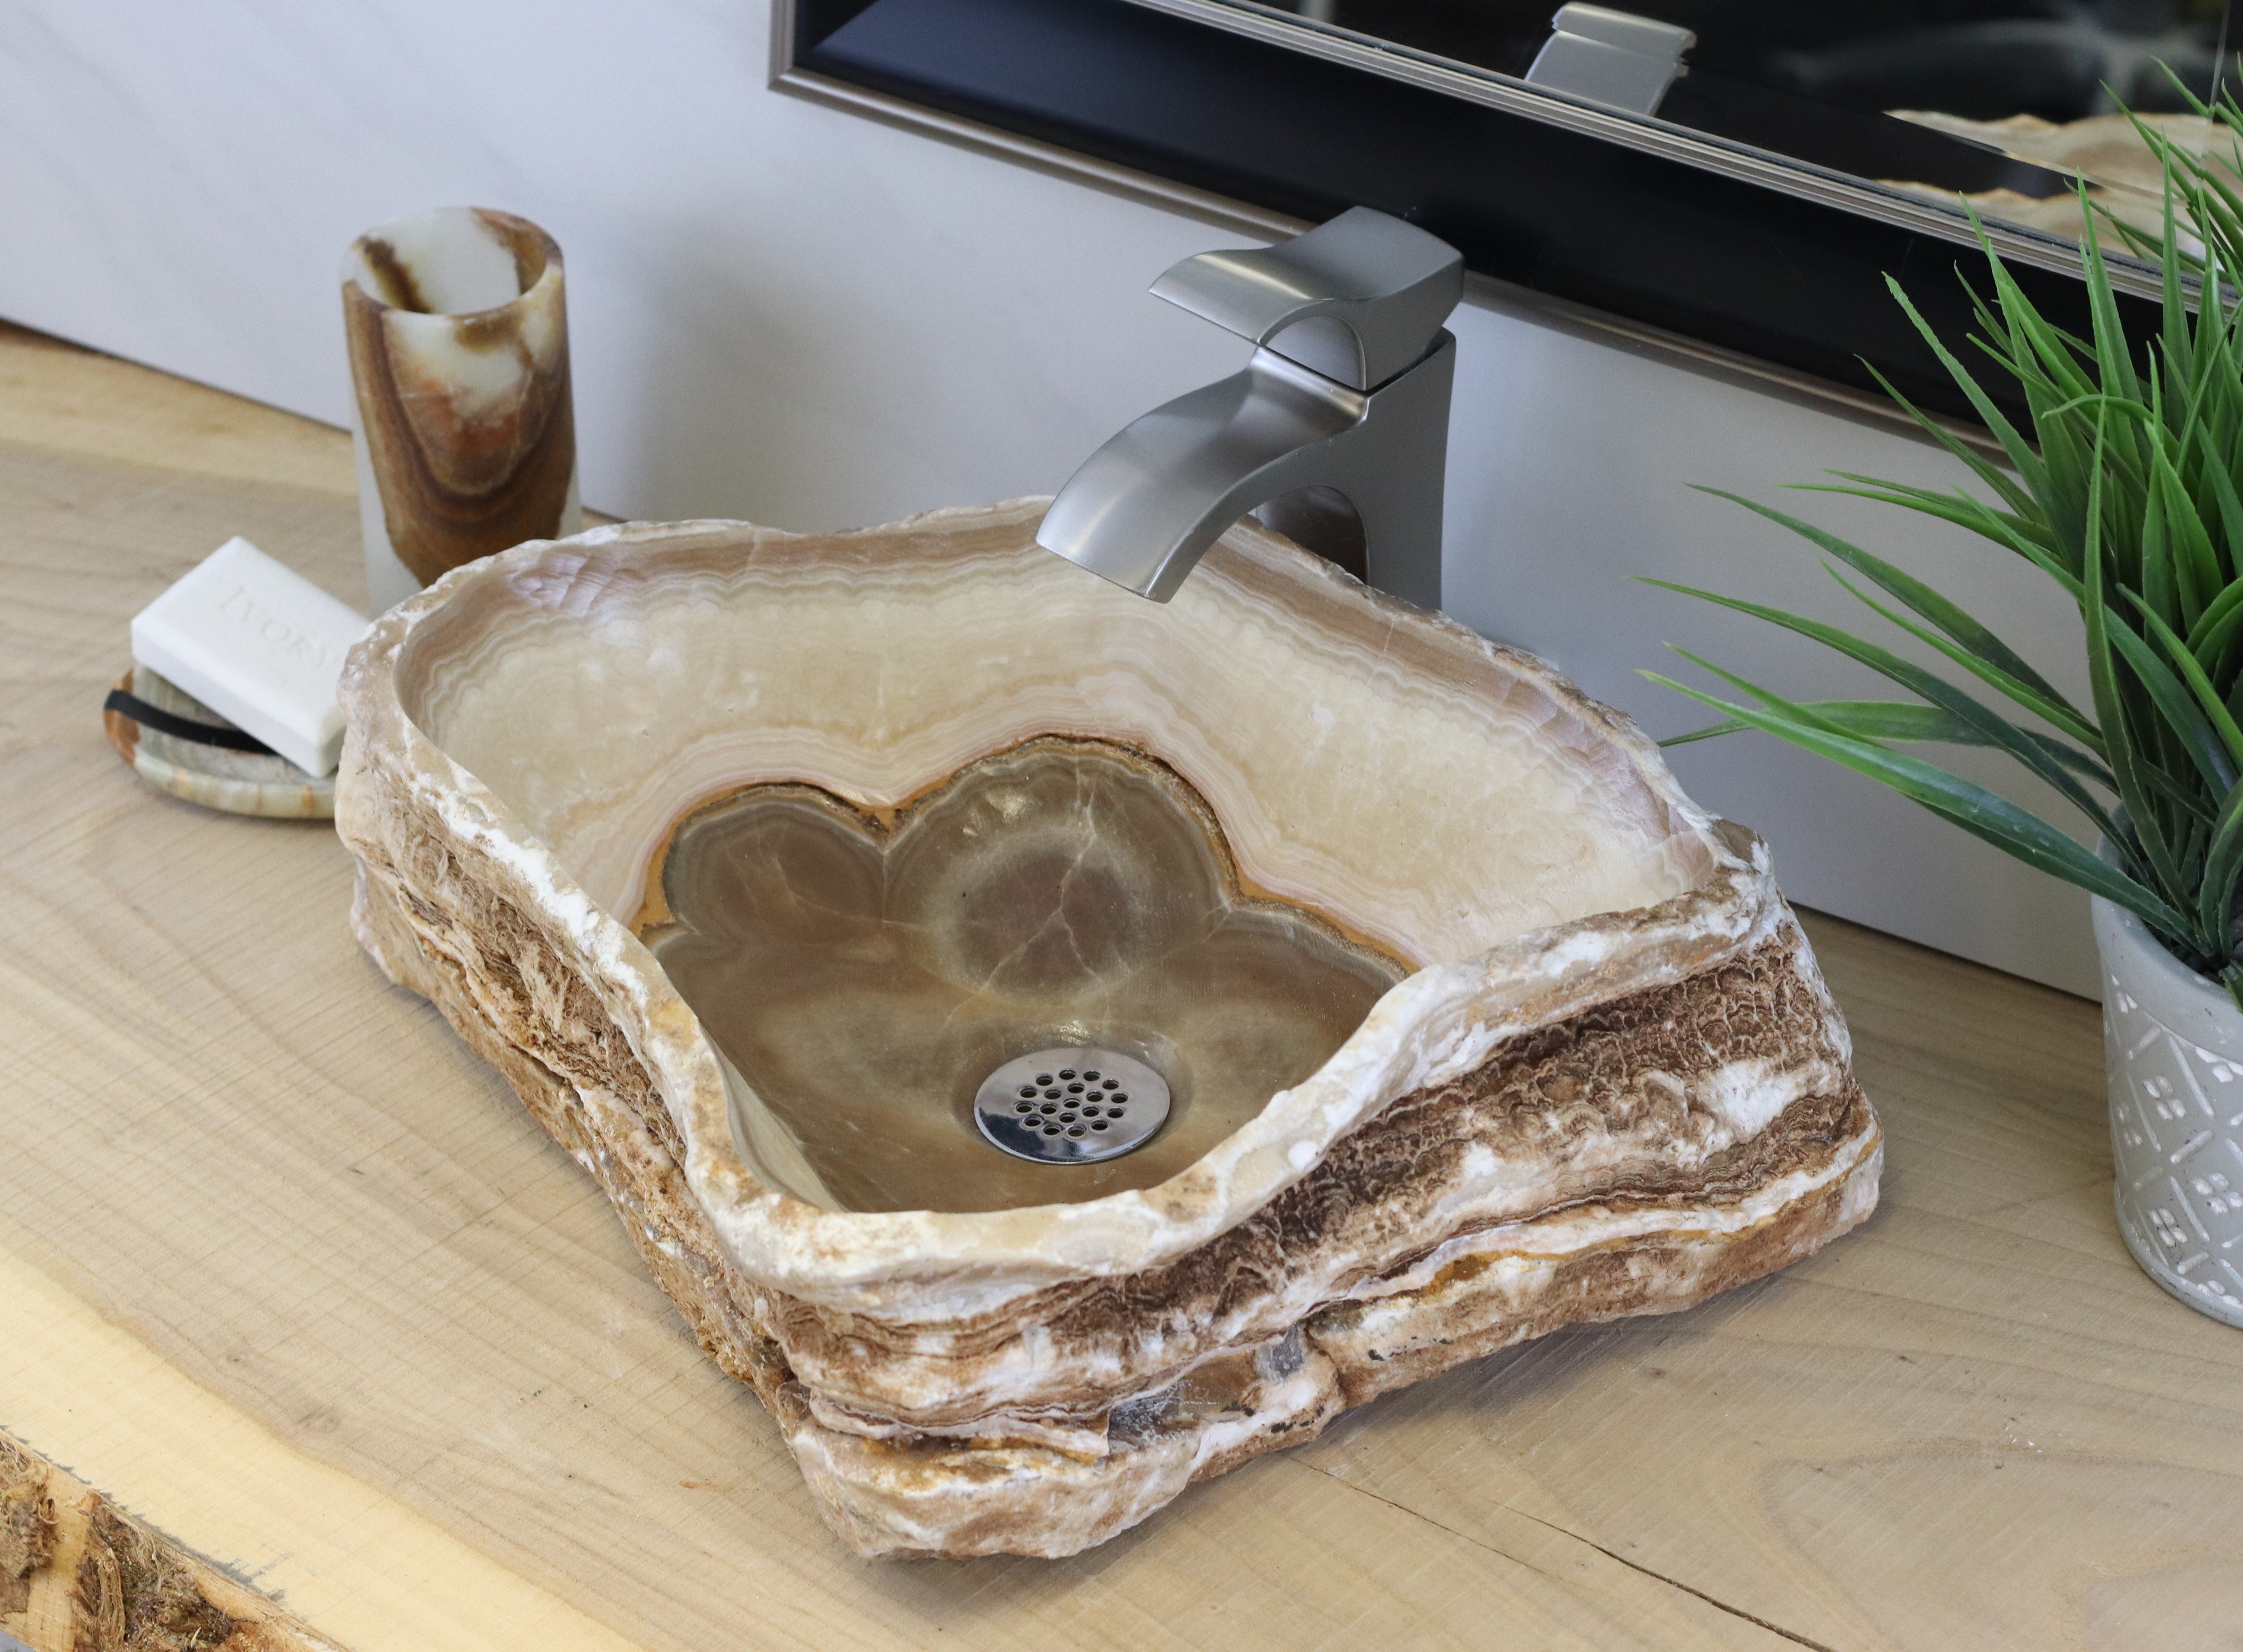 Brown and Tan Onyx Vessel Sink. A beautiful work of art. We offer fast shipping. Handmade in Mexico. We hand finish, package, and ship from the USA. Buy now at www.felipeandgrace.com. 